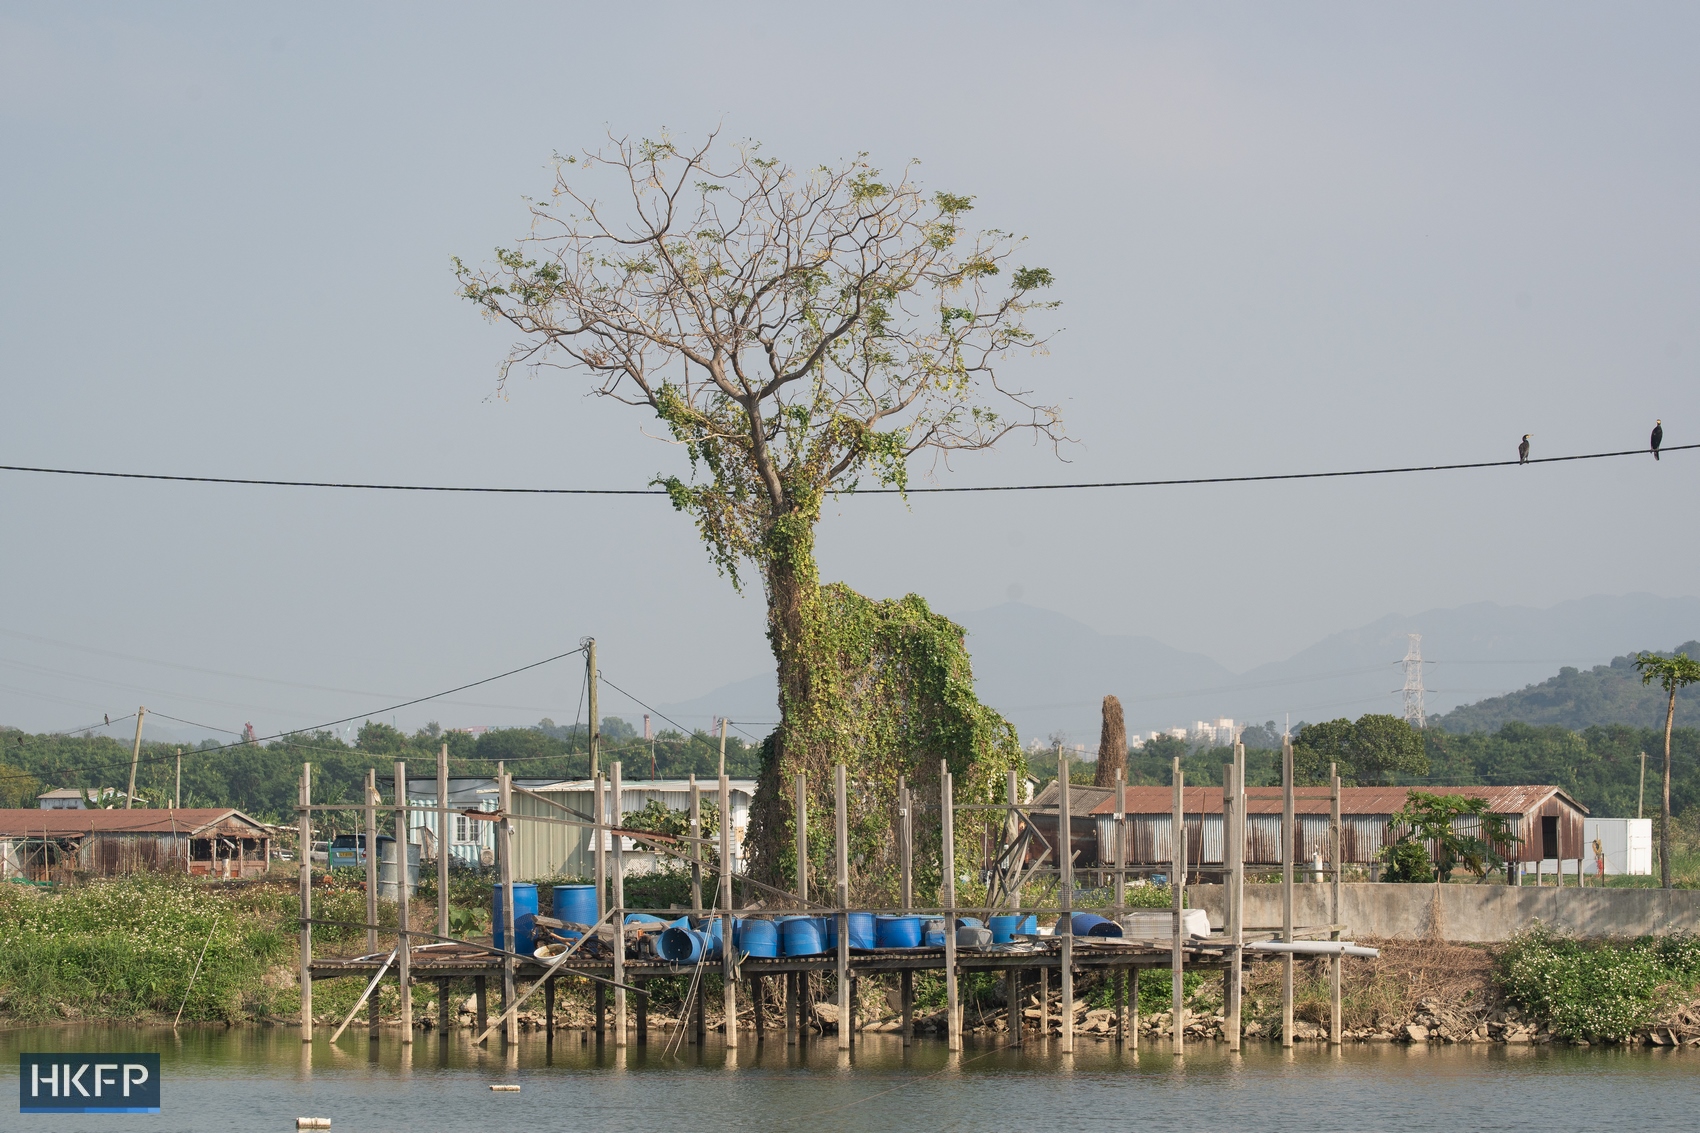 A fishpond in San Tin, located in the northwest side of Hong Kong. Photo: Kyle Lam/HKFP.